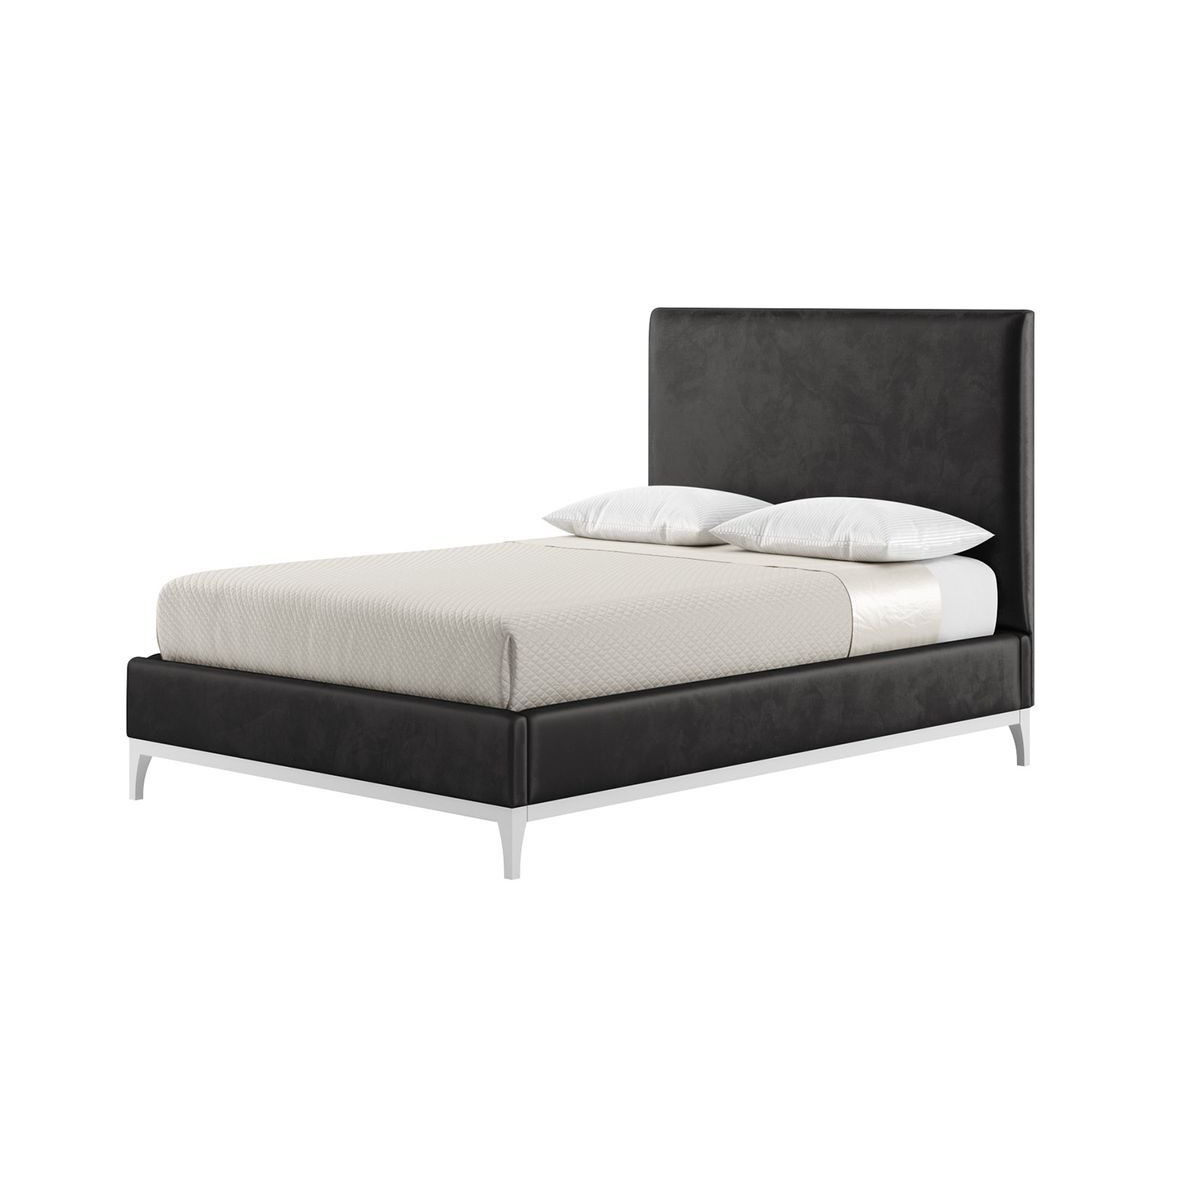 Diane 4ft6 Double Bed Frame with modern smooth headboard, black, Leg colour: white - image 1